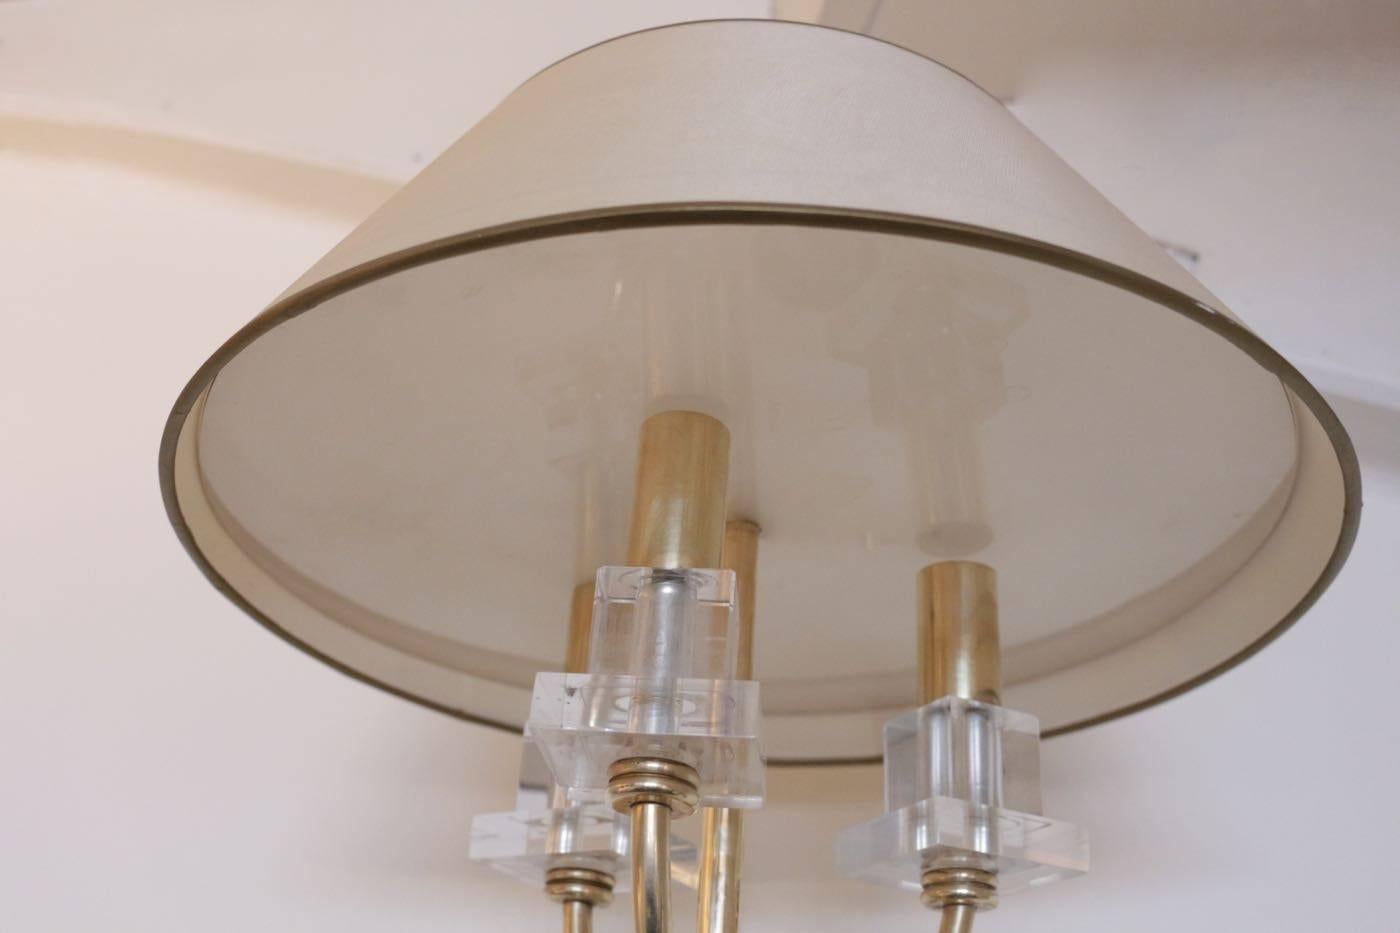 Elegant pair of Marcel Asselbur sconces, 1950s

Round back plate with 